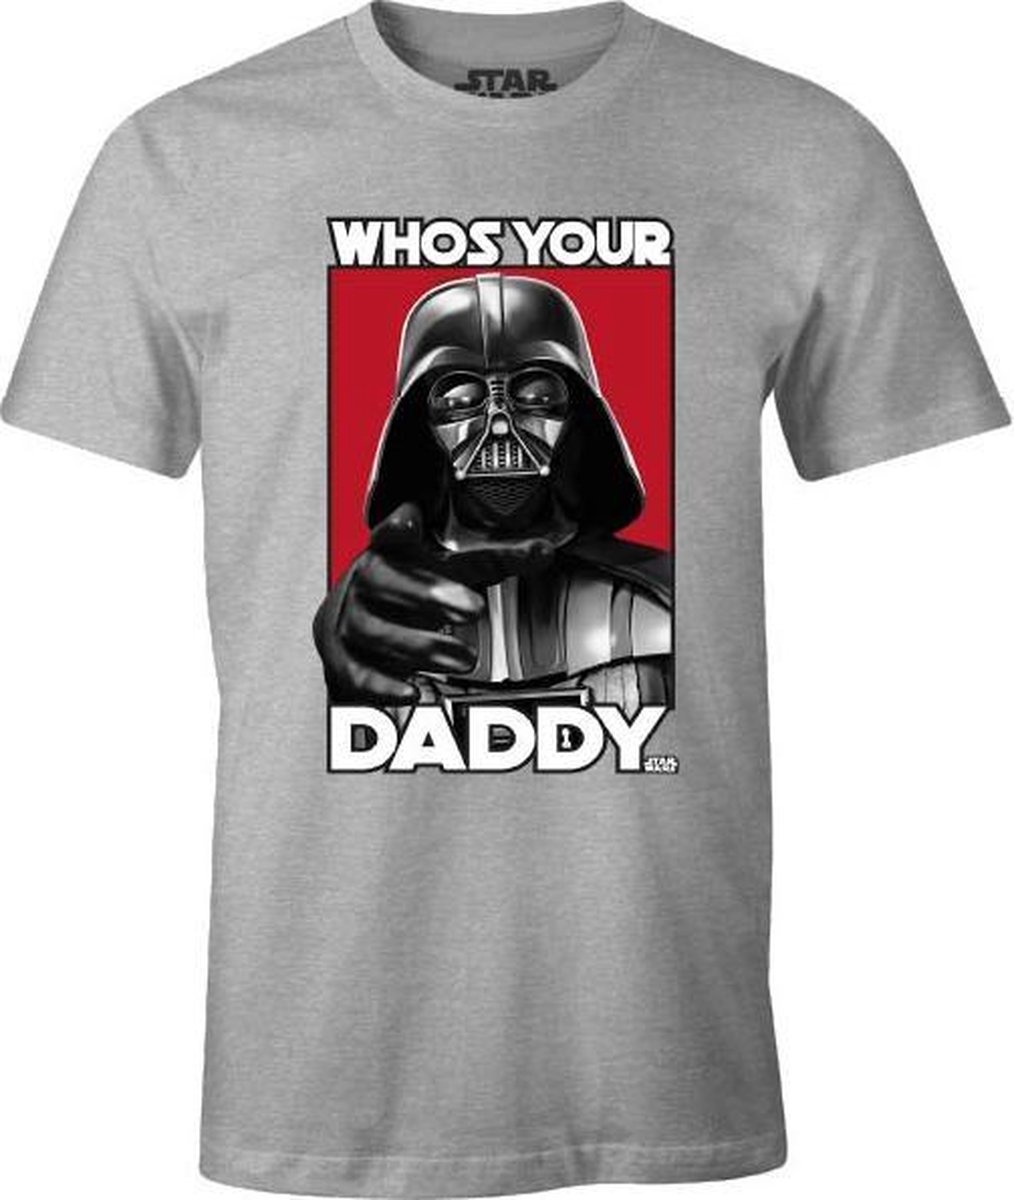 Star Wars - Grey Men's T-shirt - Who's your daddy? - M